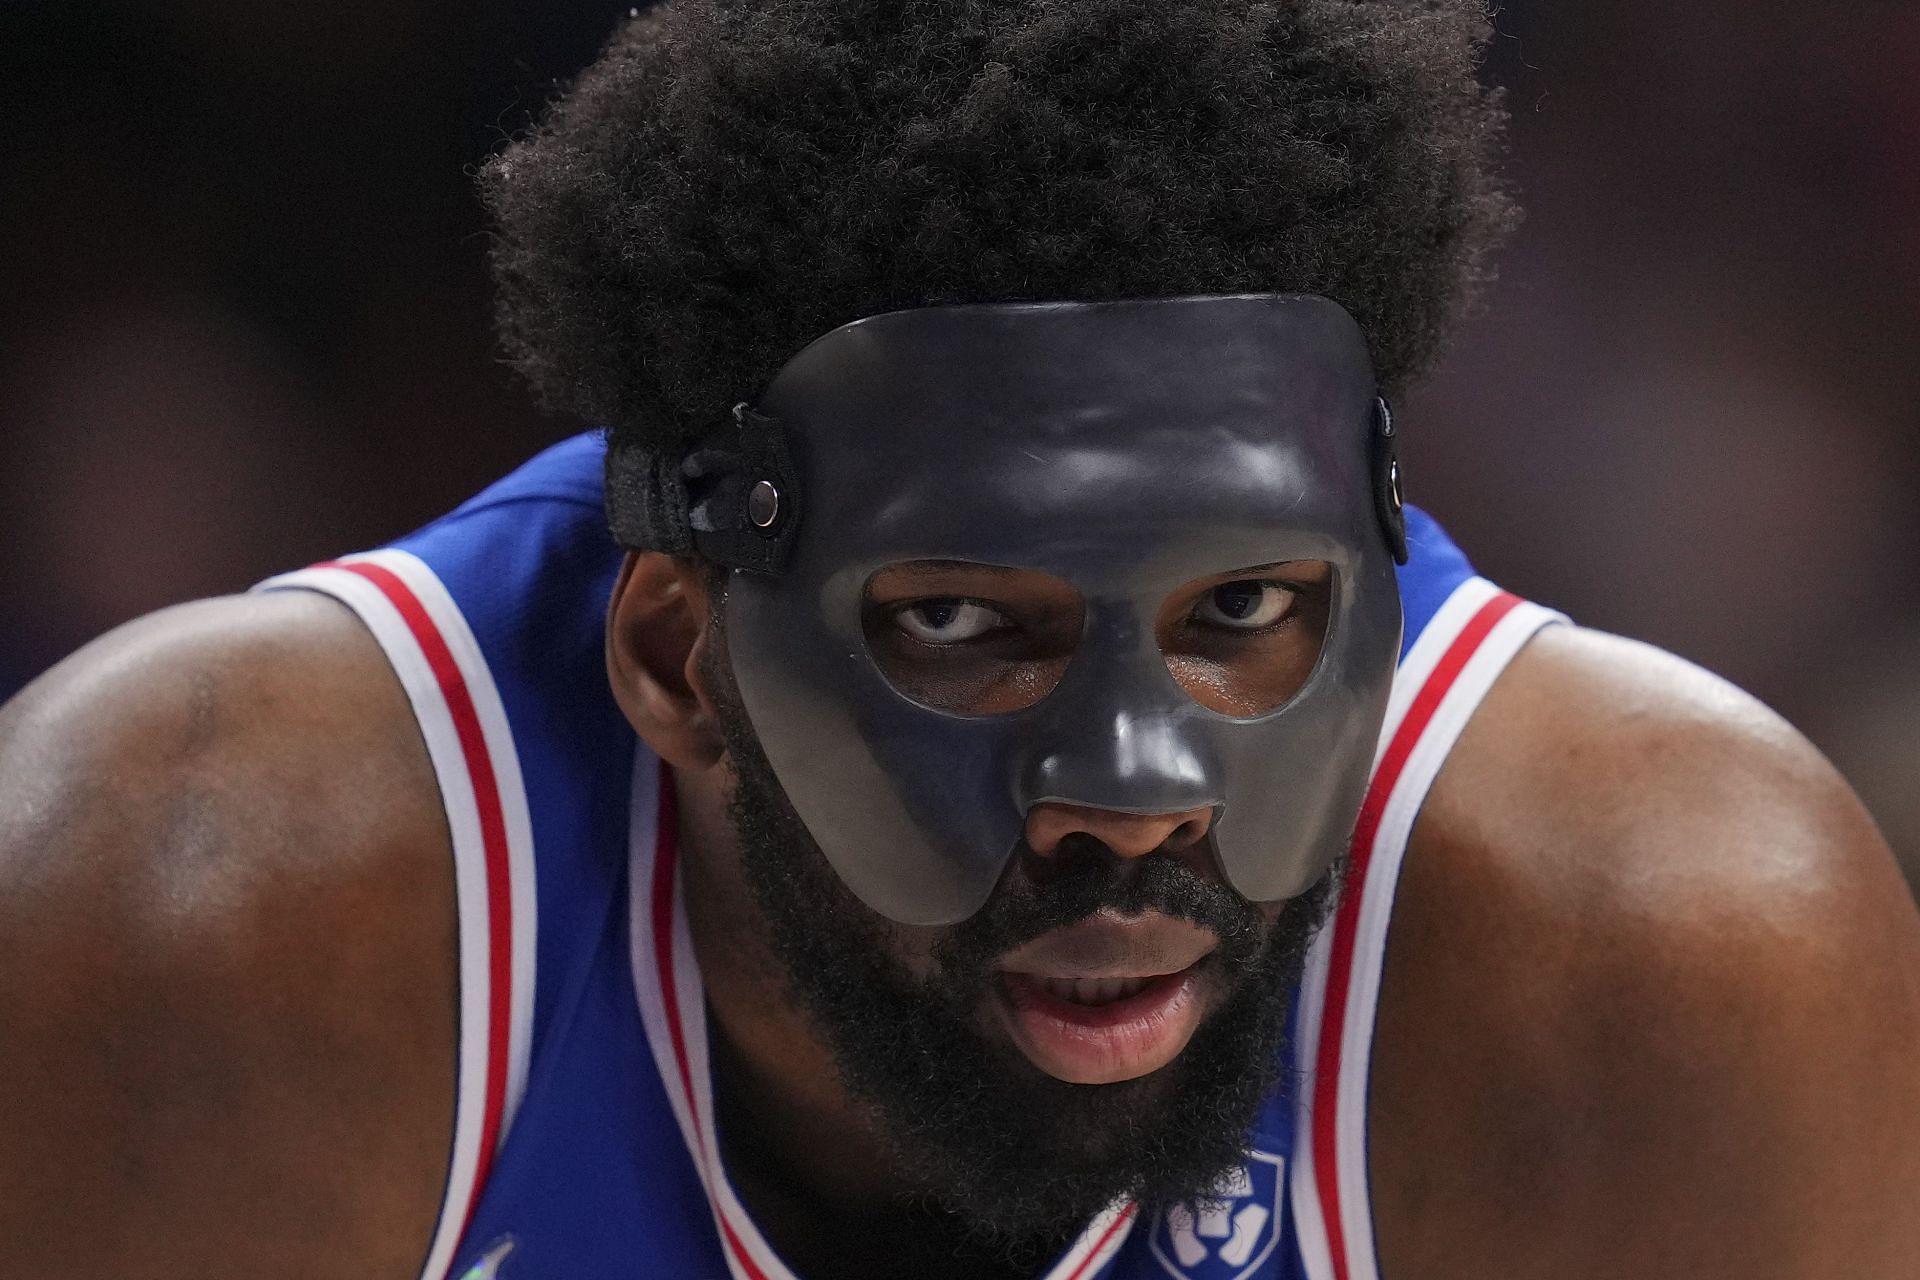 A masked Joel Embiid motivated Philadelphia 76ers to a Game 3 victory against the Miami Heat